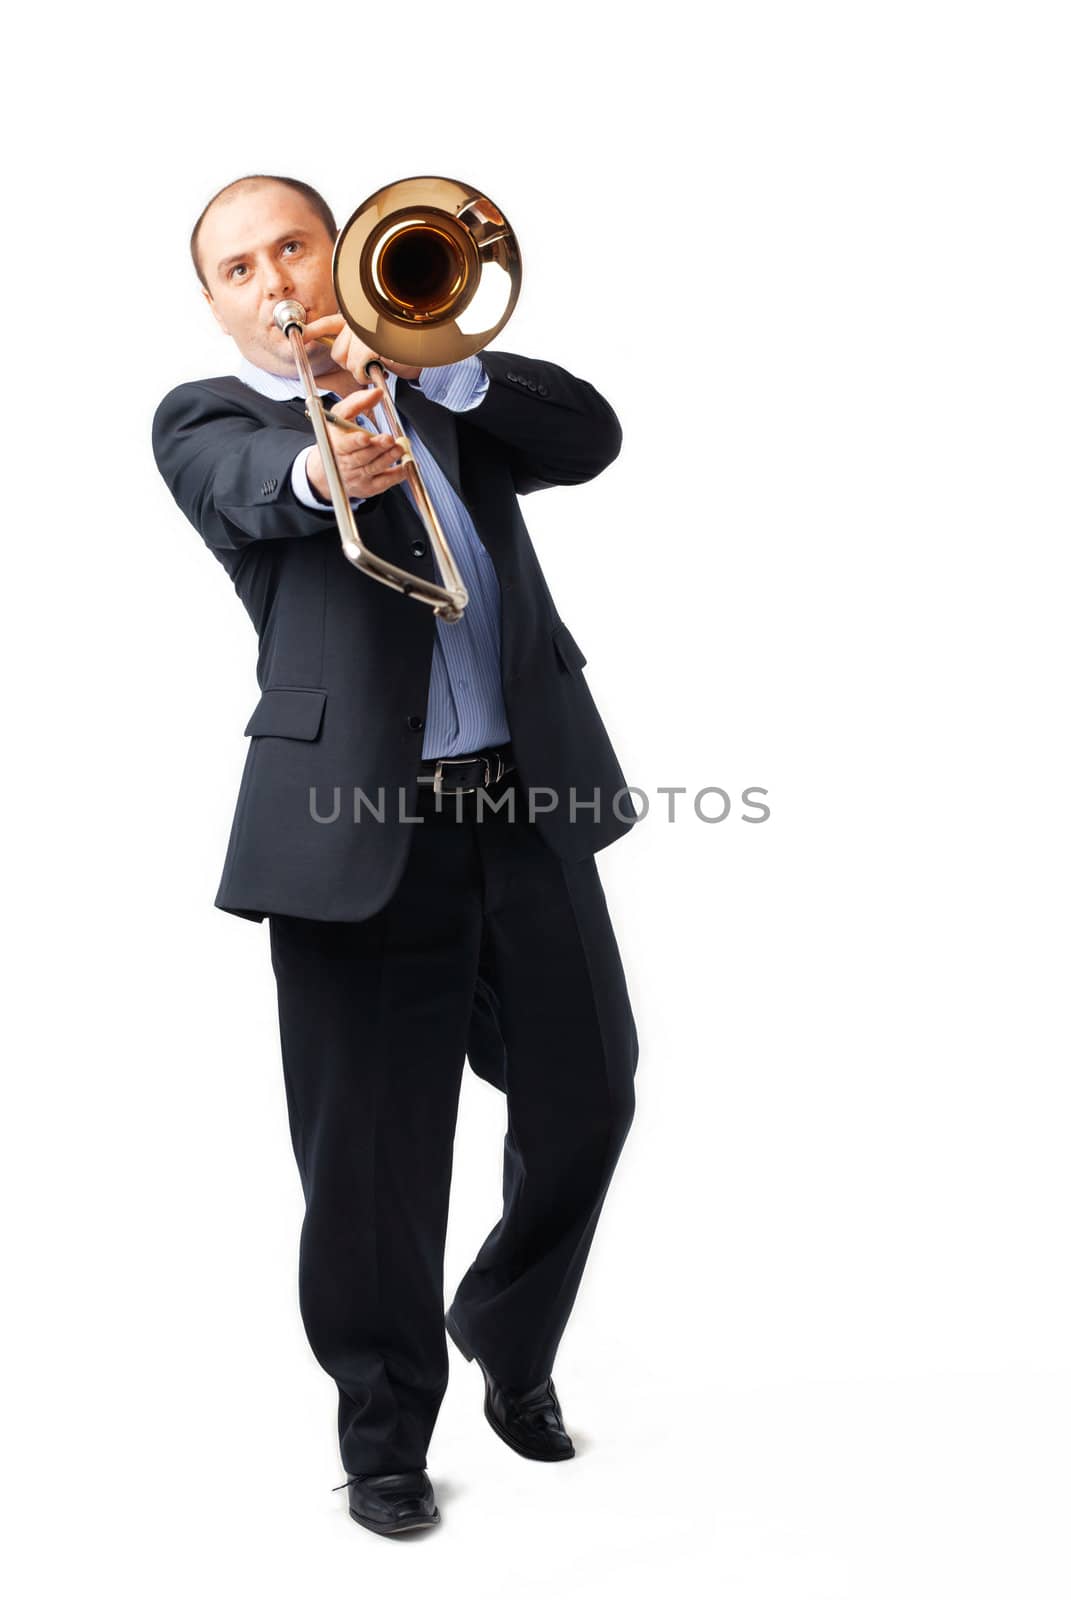 Portrait of a young man playing his trombone on white